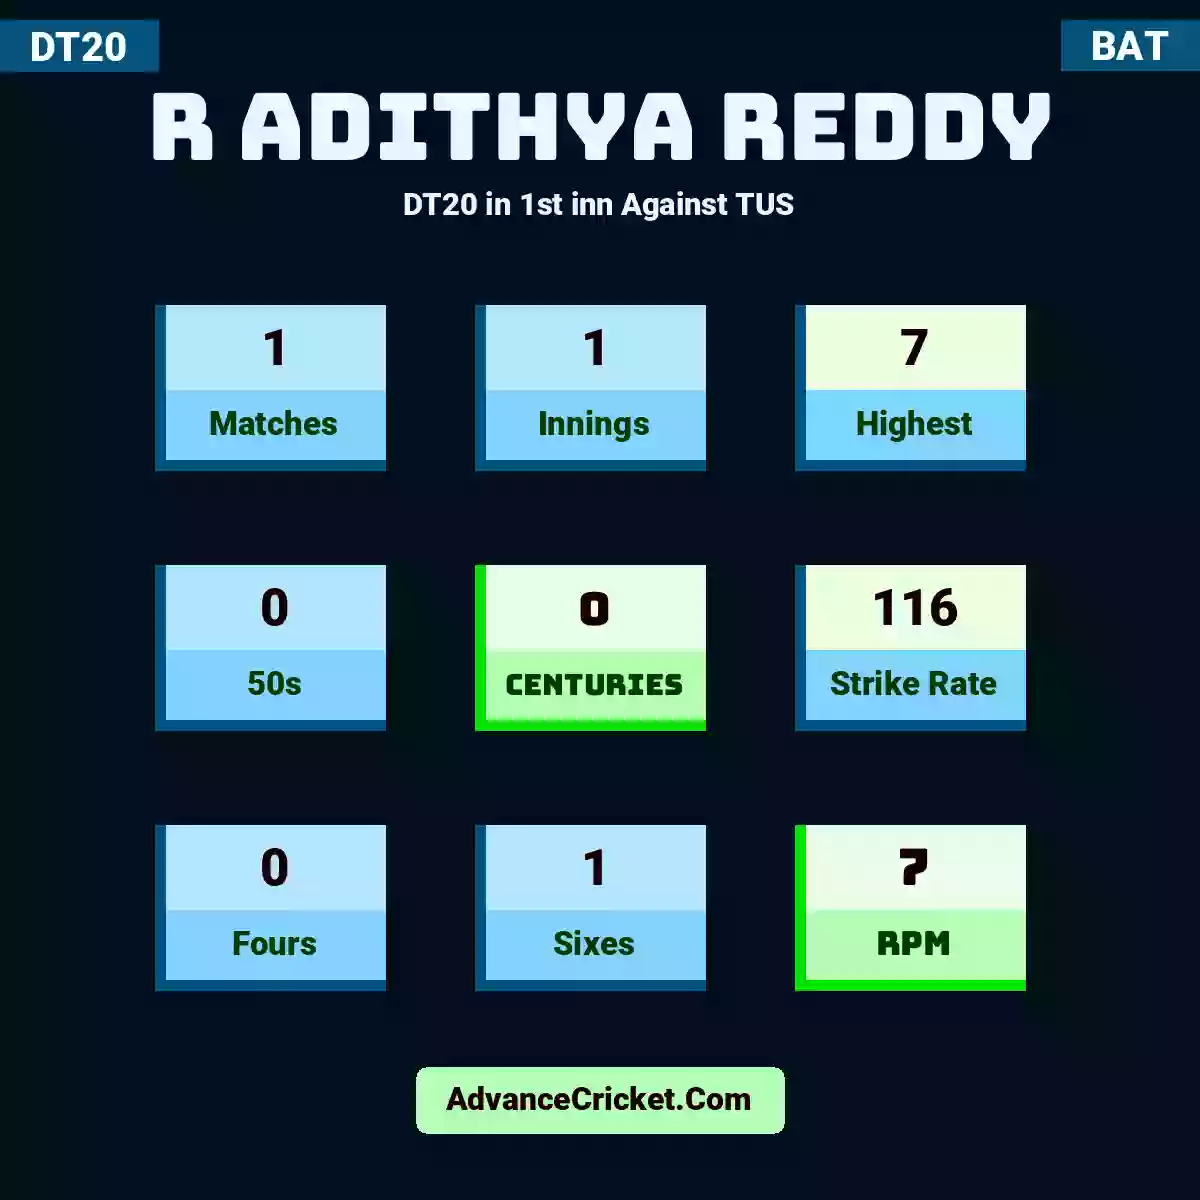 R Adithya Reddy DT20  in 1st inn Against TUS, R Adithya Reddy played 1 matches, scored 7 runs as highest, 0 half-centuries, and 0 centuries, with a strike rate of 116. R.Adithya.Reddy hit 0 fours and 1 sixes, with an RPM of 7.